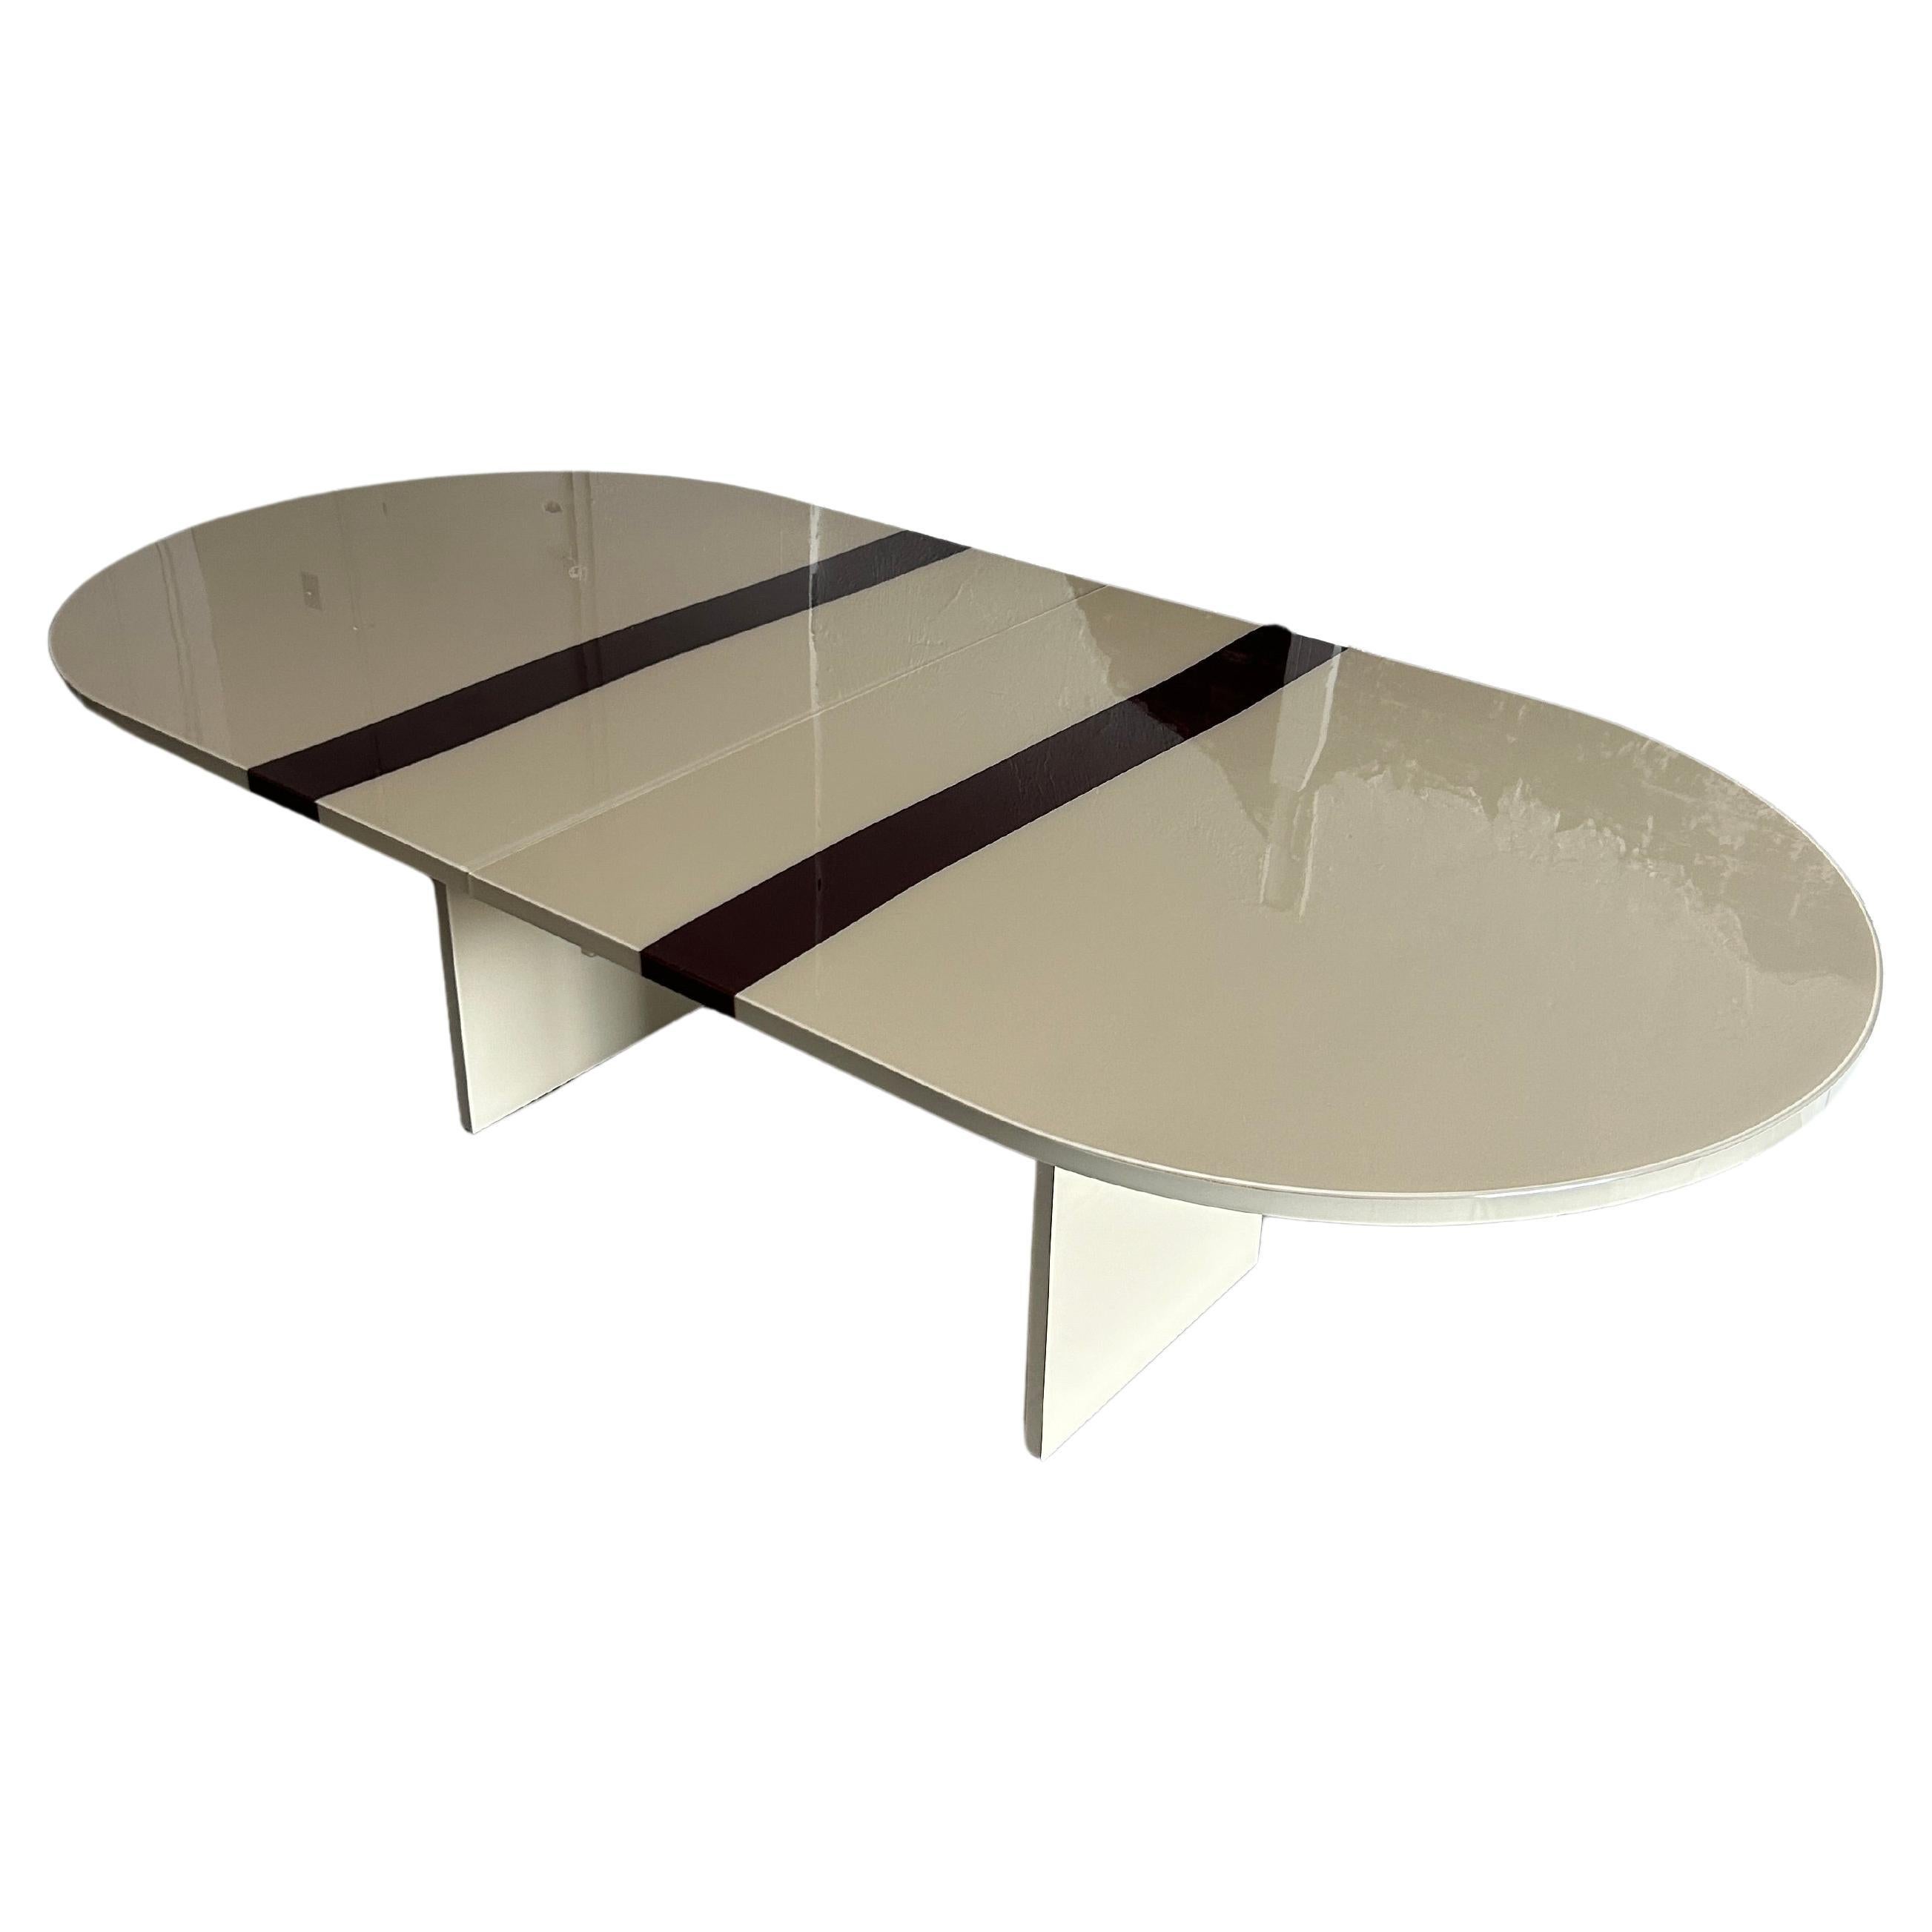 Post modern custom tan with maroon stripe dining table by Pace